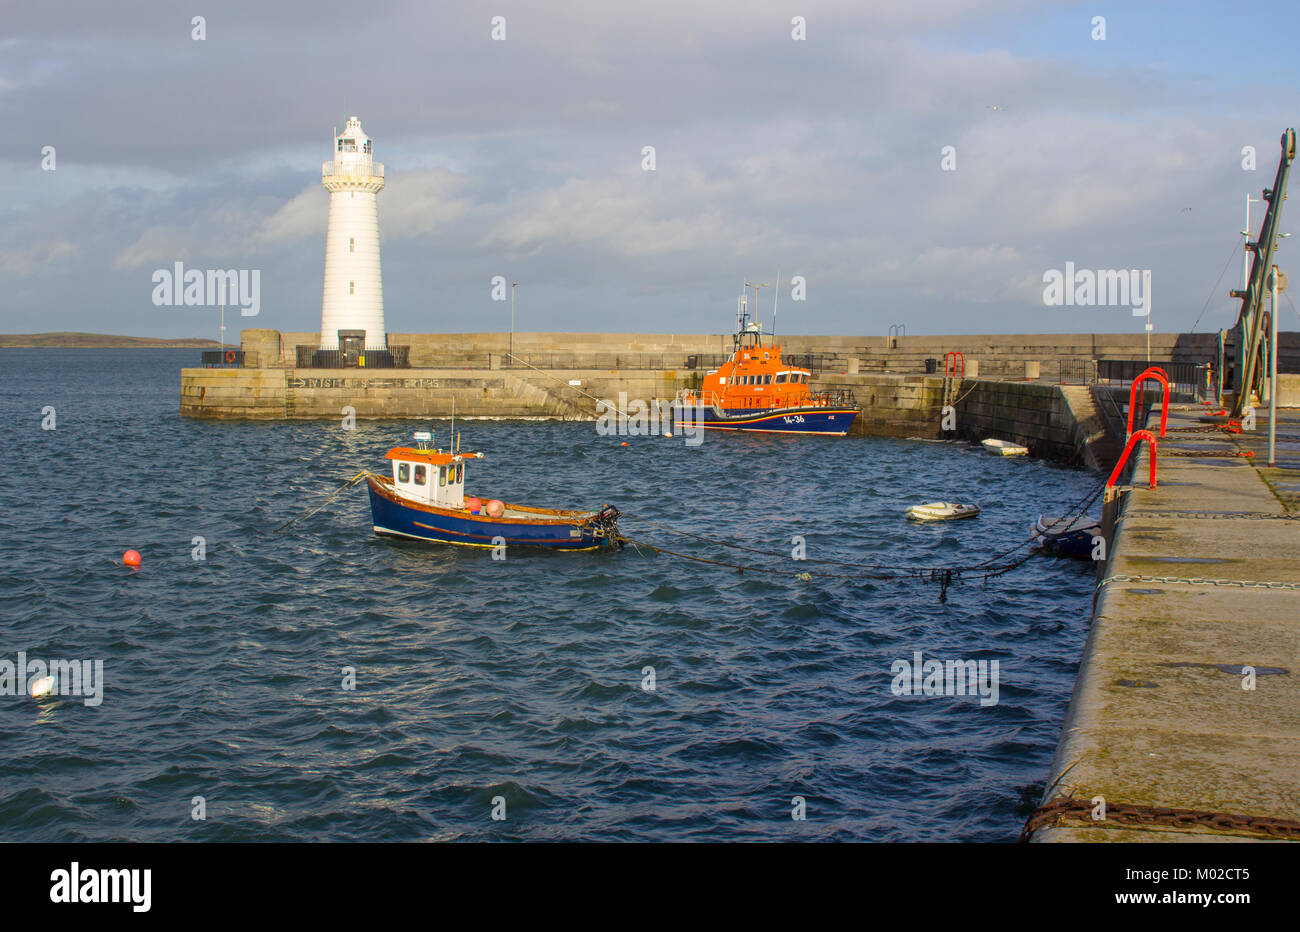 The famous tapered tower automatic lighthouse built with cut limestone on the harbour pier in Donaghadee in County Down in Northern Ireland Stock Photo